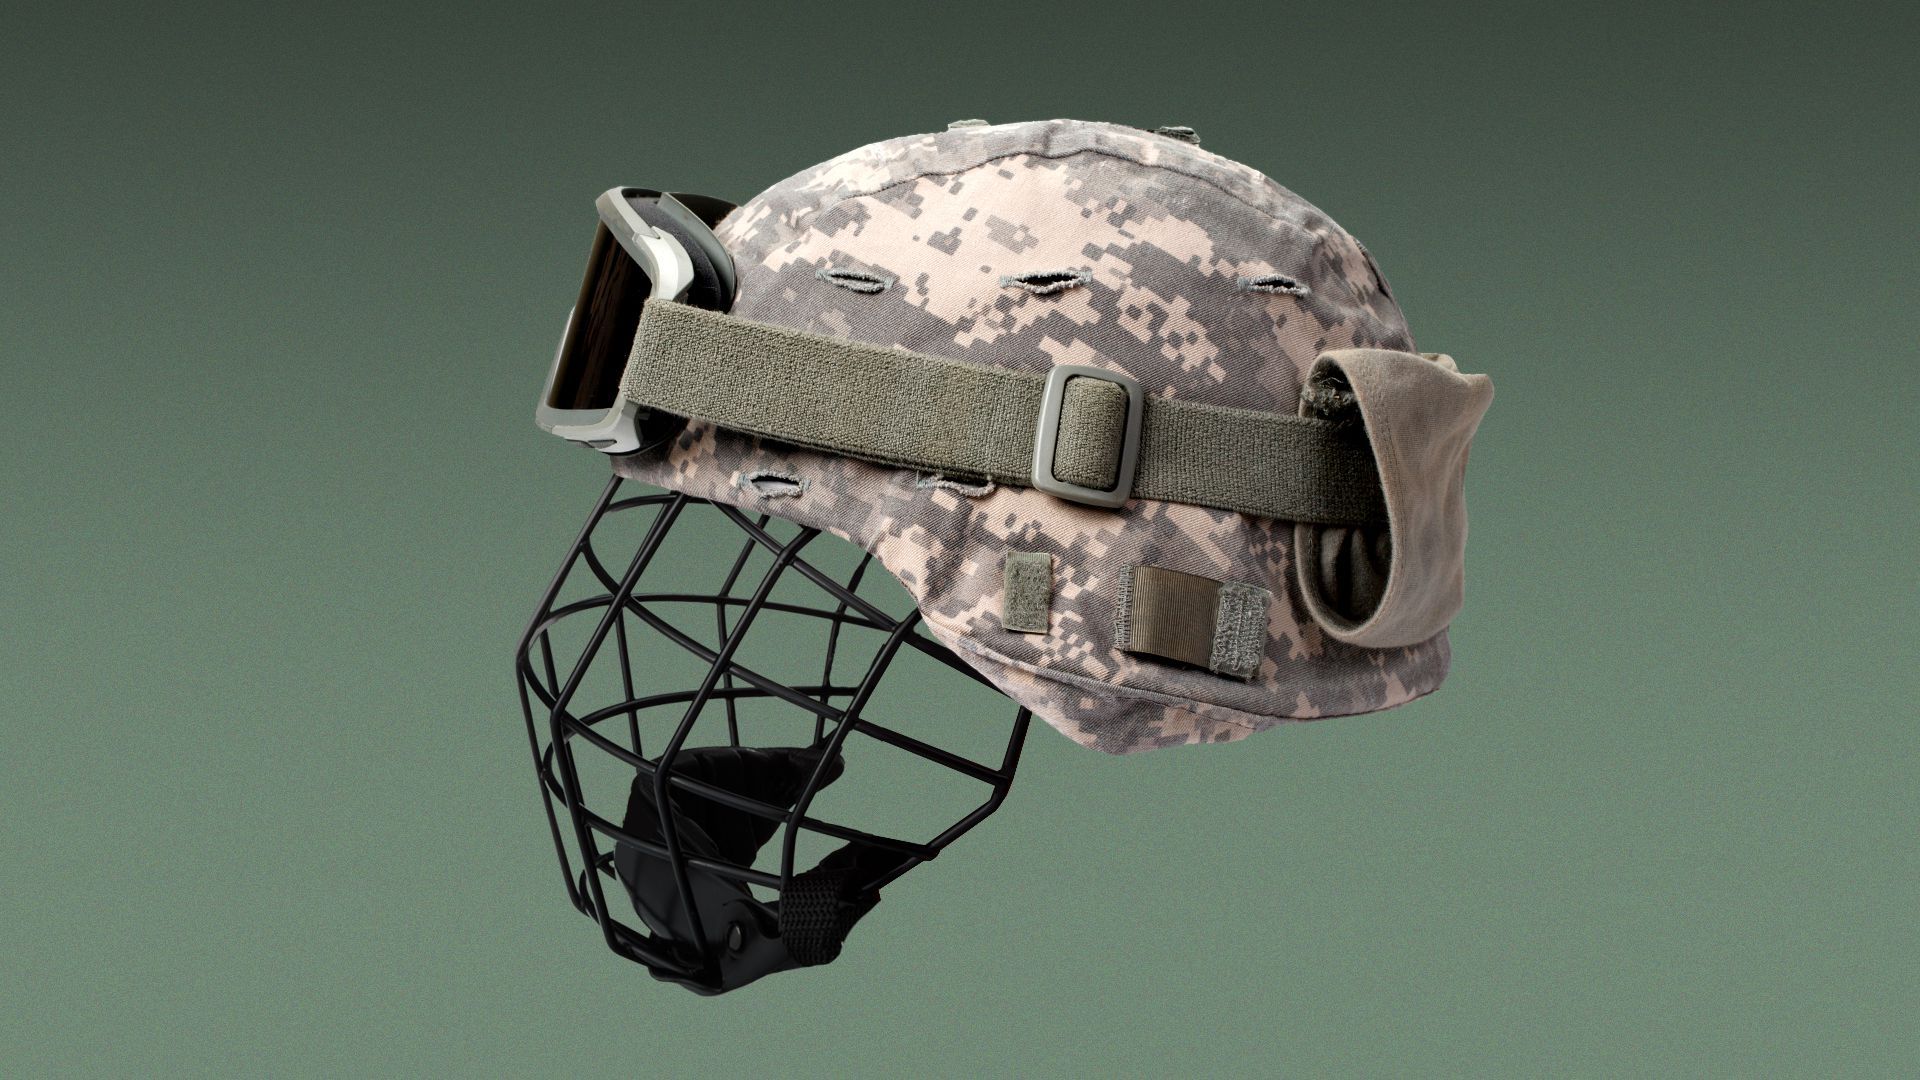 Illustration of a helmet made with a combination of a military helmet and a hockey helmet's face guard